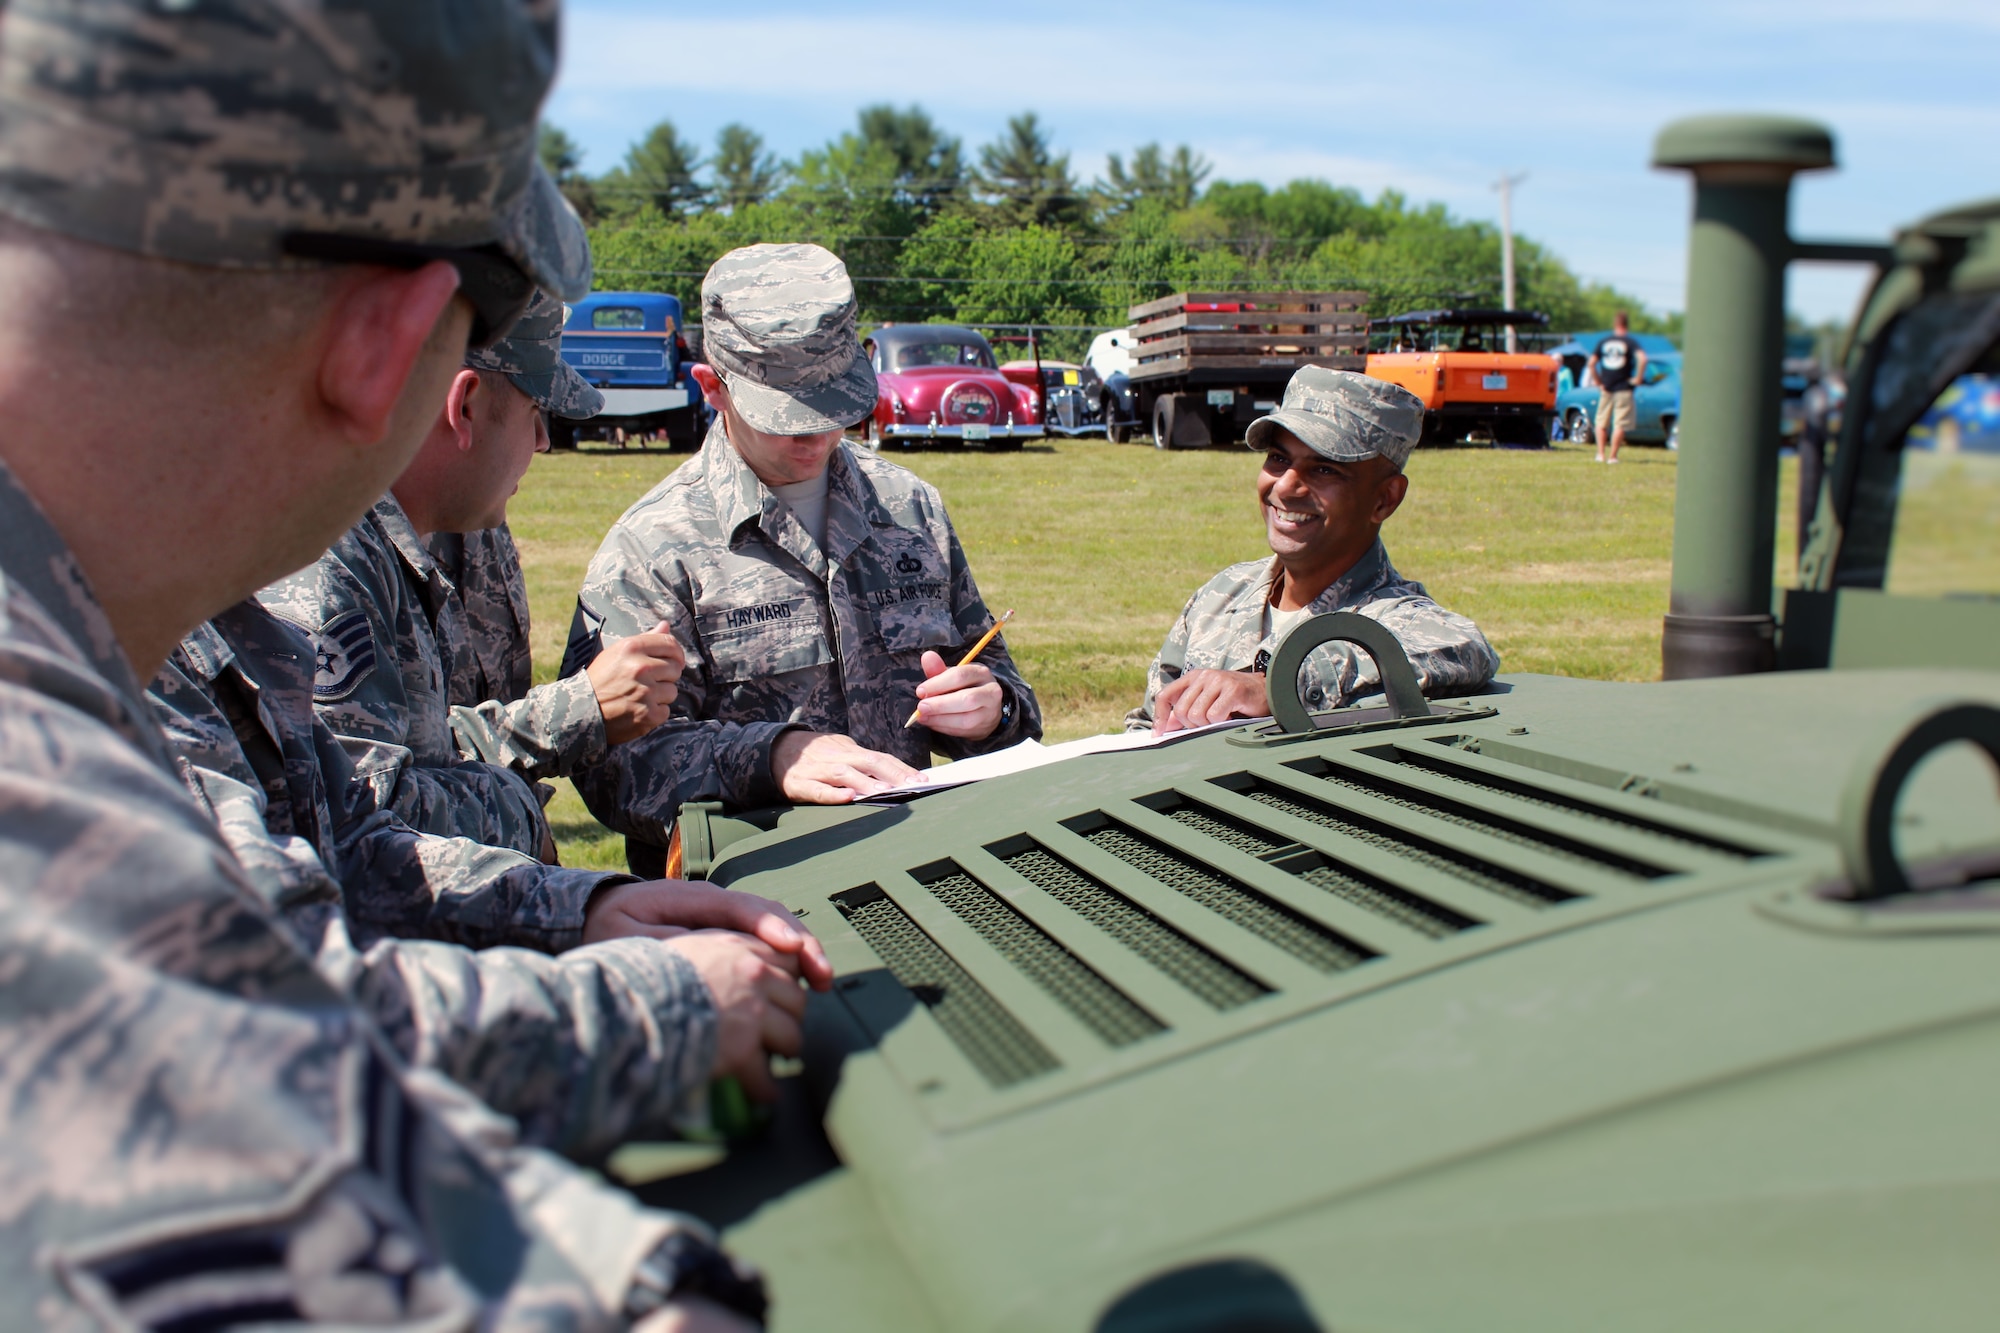 U.S. Air Force Senior Master Sgt. Pranav Zaveri, mobile tower chief controller, and other members of the 260th Air Traffic Control Squadron discuss the MSN-7 Mobile Control Tower display at the Wings and Wheels community event in Rochester, N.H. June 4, 2016. The Airmen greeted and spoke with community members and families attending the event, and showed them how MSN-7 can be used for more than just military purposes. (U.S. Air National Guard photo by Staff Sgt. Kayla Rorick)